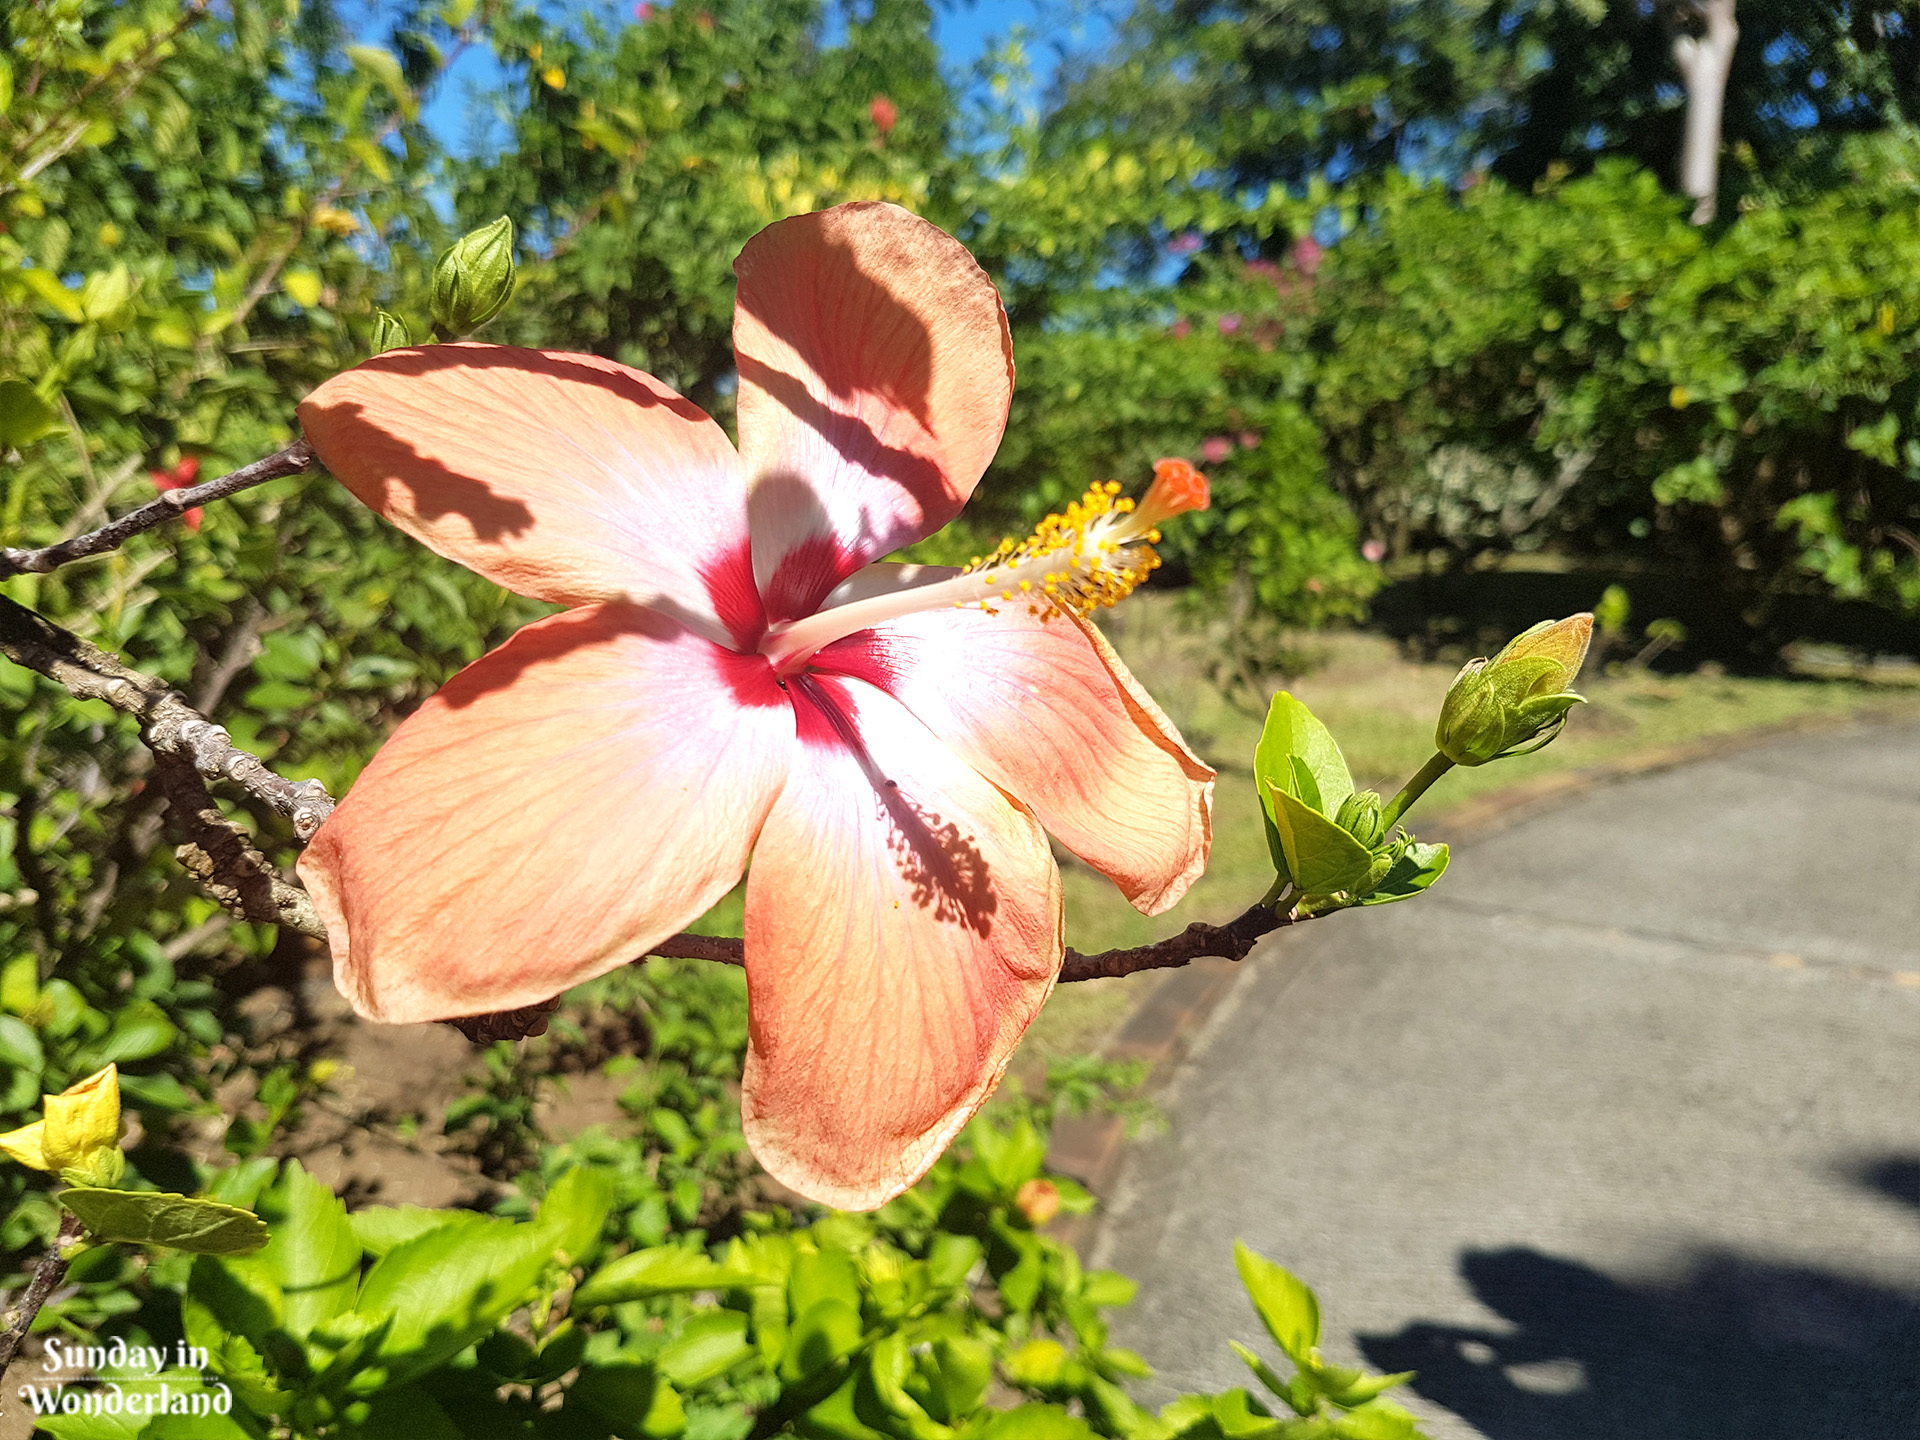 A beautiful pink hibiscus in Botanical Garden in Deshaies in Guadeloupe - Sunday in Wonderland Blog